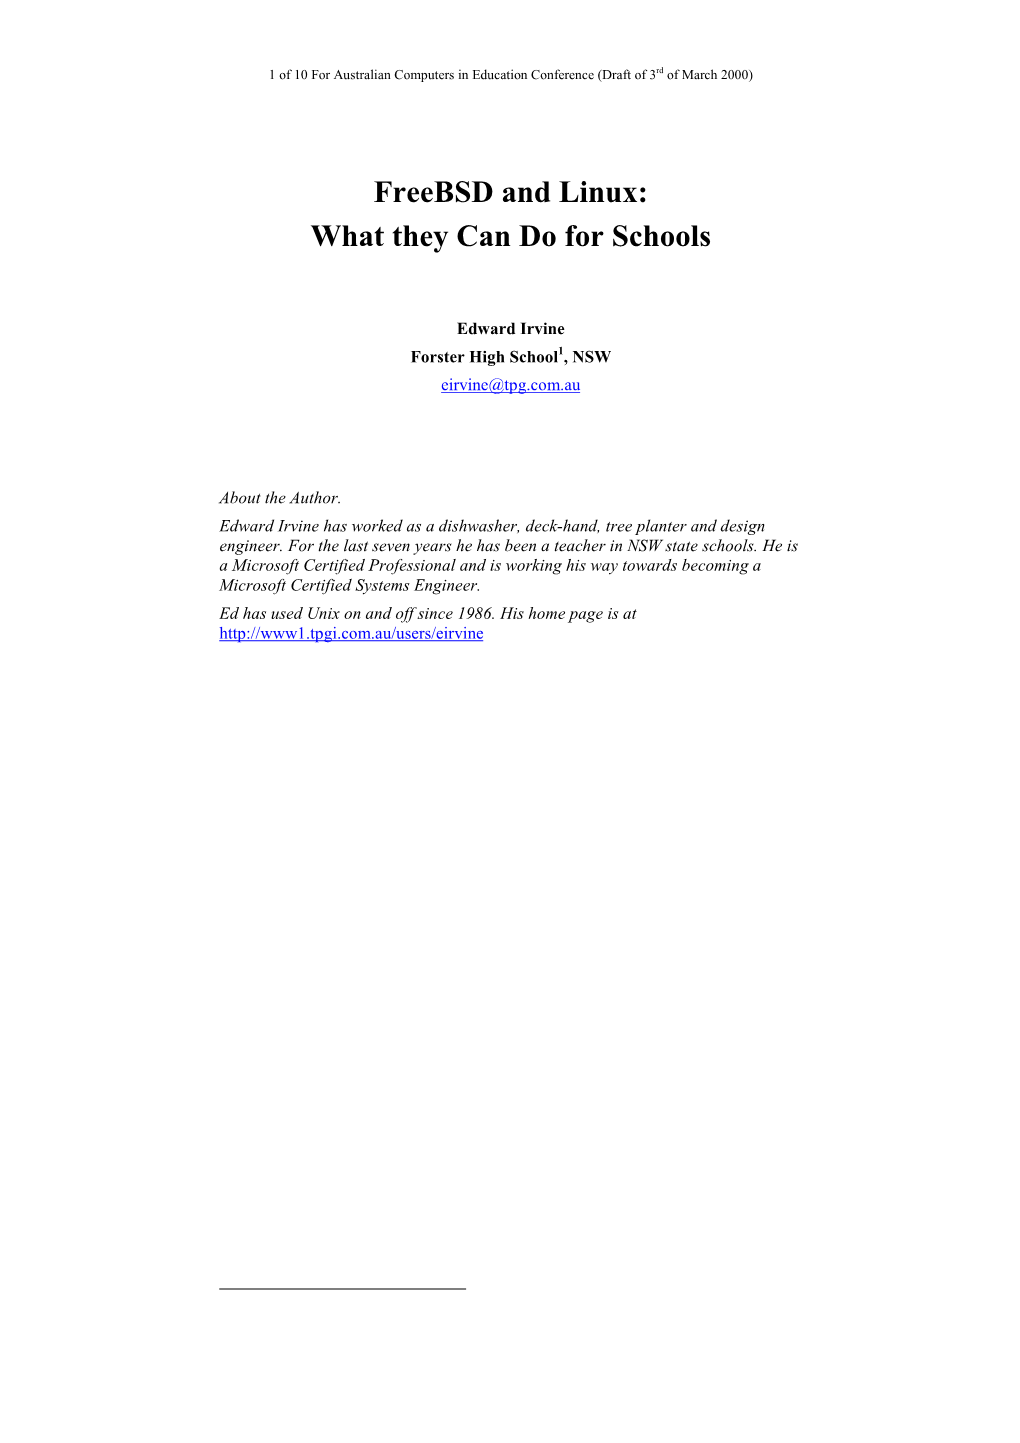 Freebsd and Linux: What They Can Do for Schools